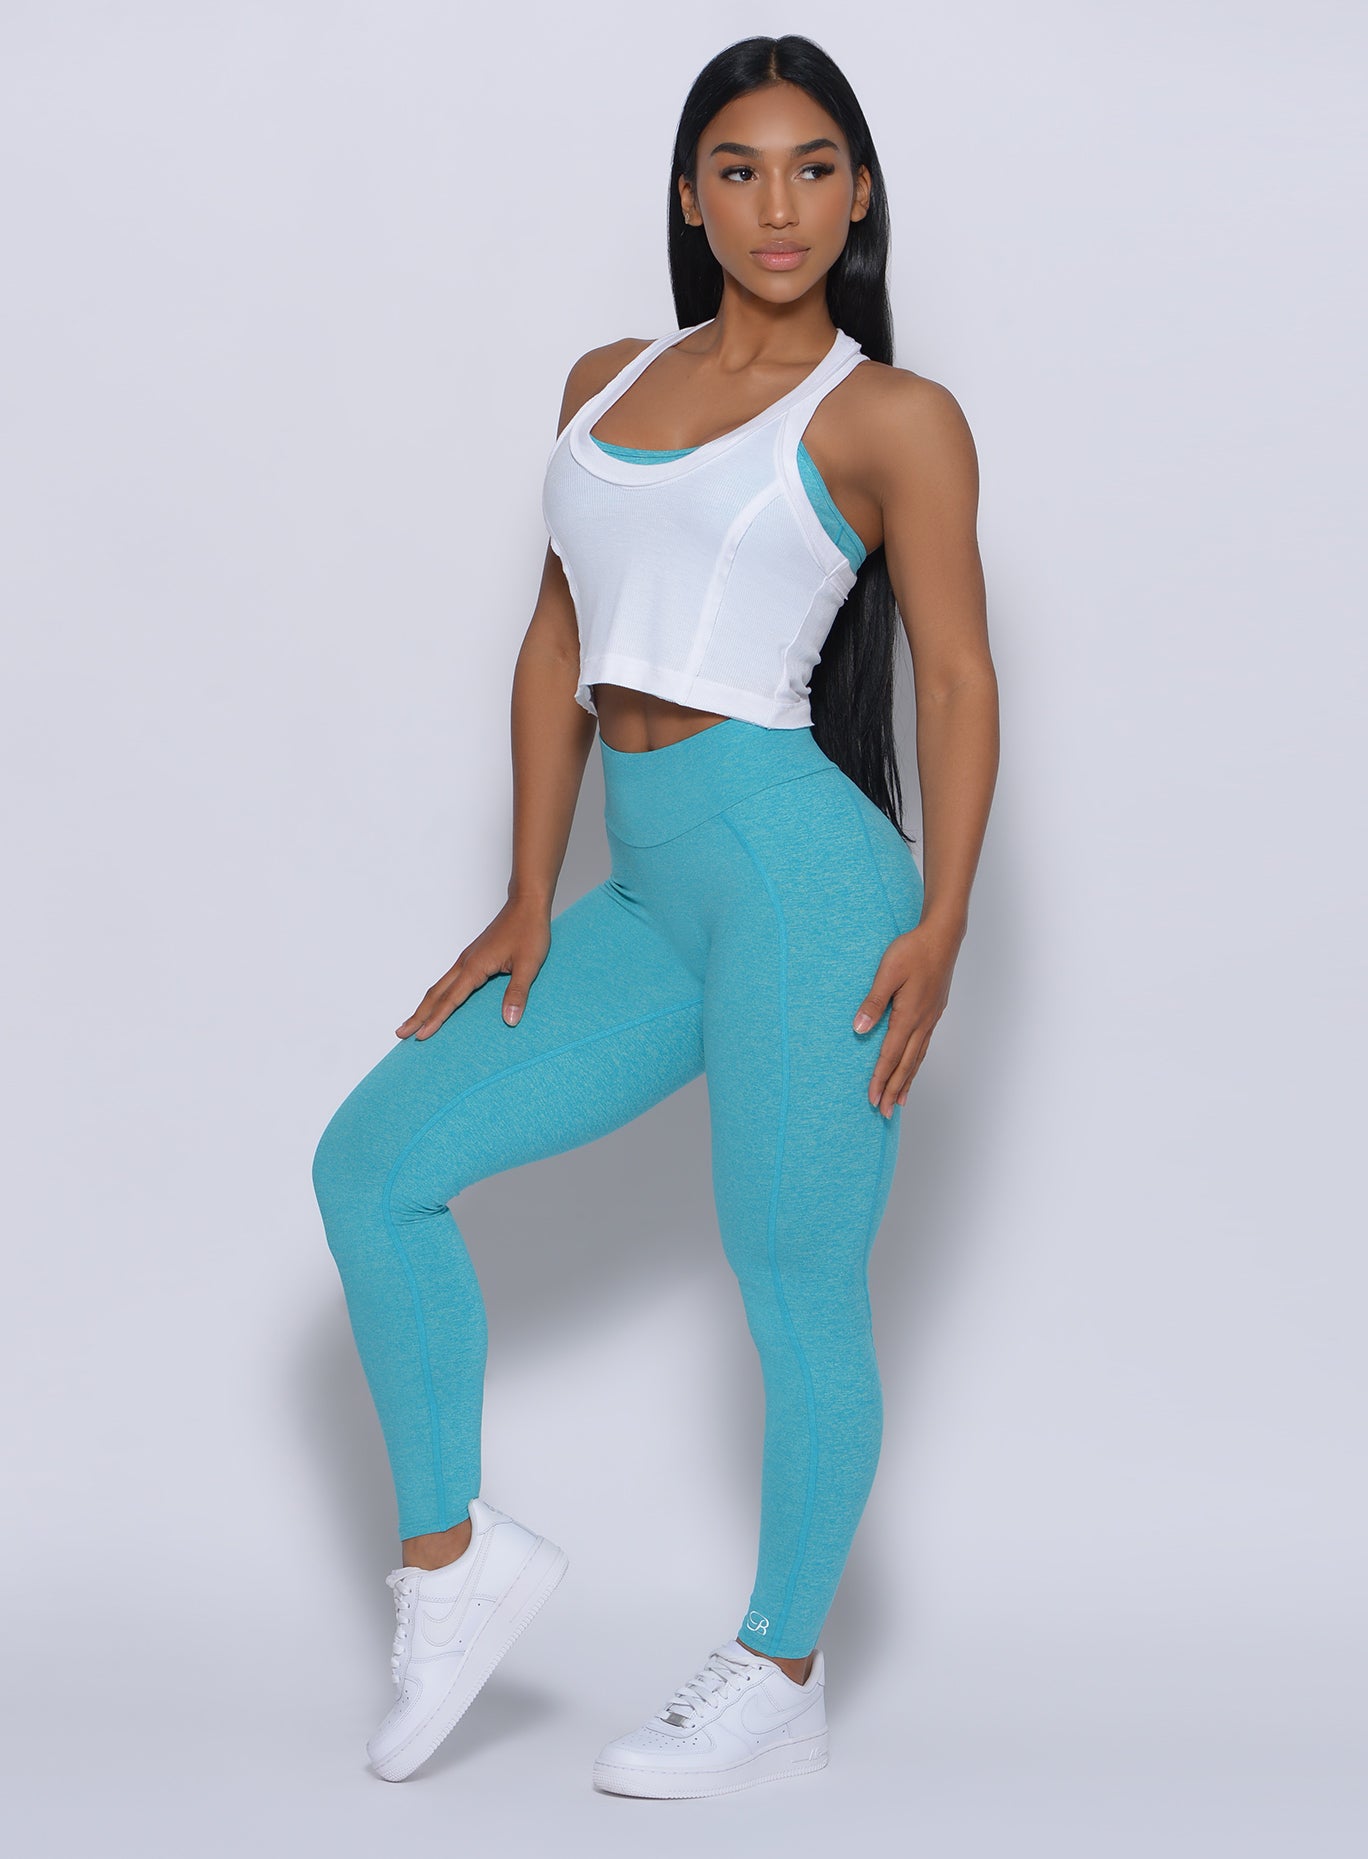 Right side view of a model angled right  wearing our white rib crop tank and a blue leggings